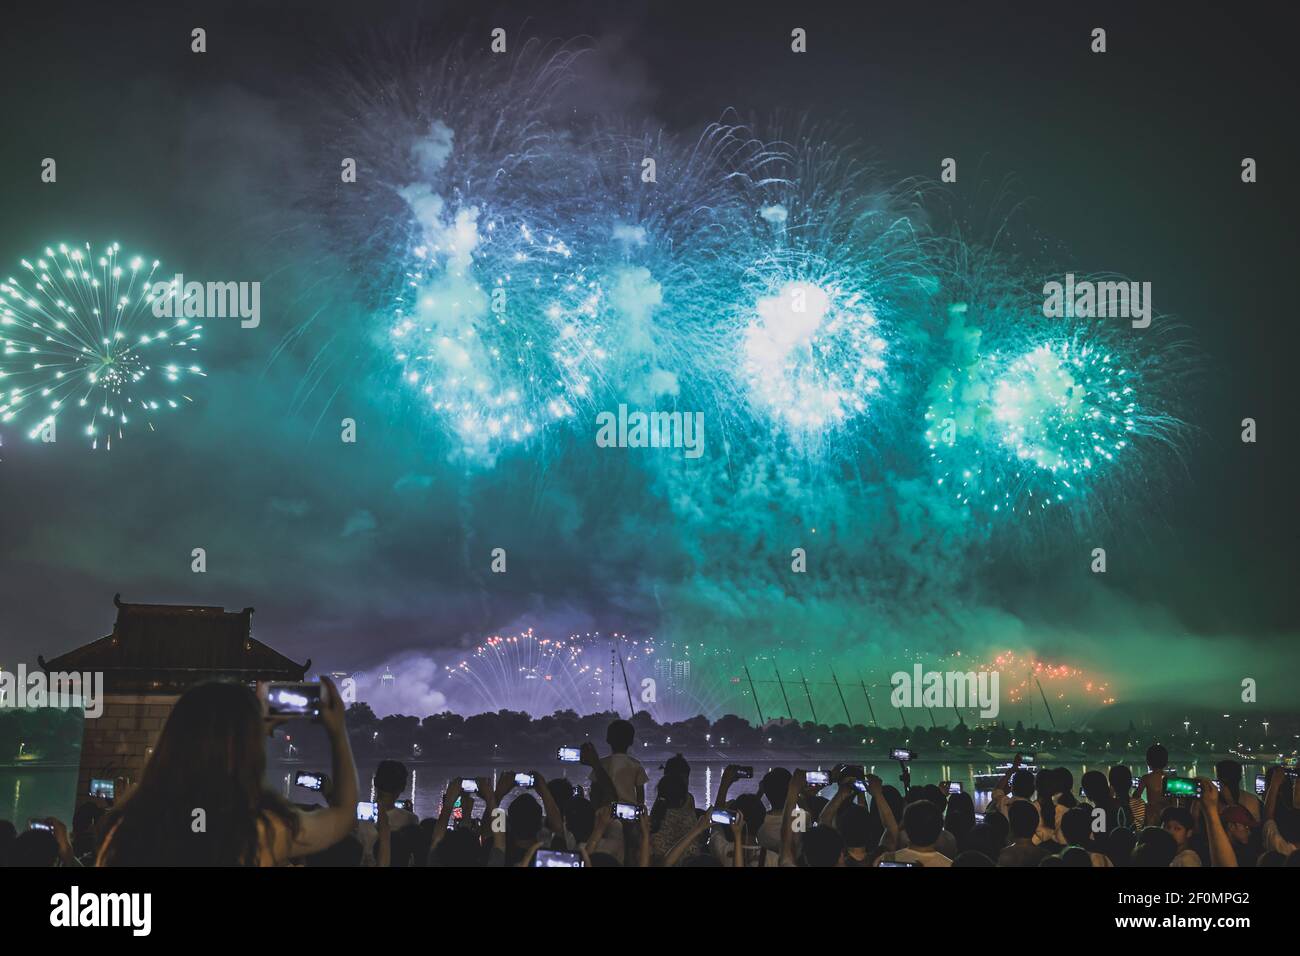 Local residents gather to watch fireworks exploding in the sky over the Xiangjiang River in a ceremony to celebrate the first China-Africa Economic and Trade Expo in Changsha city, central China's Hunan province, 26 June 2019. (Photo by LWL - Imaginechina/Sipa USA) Stock Photo